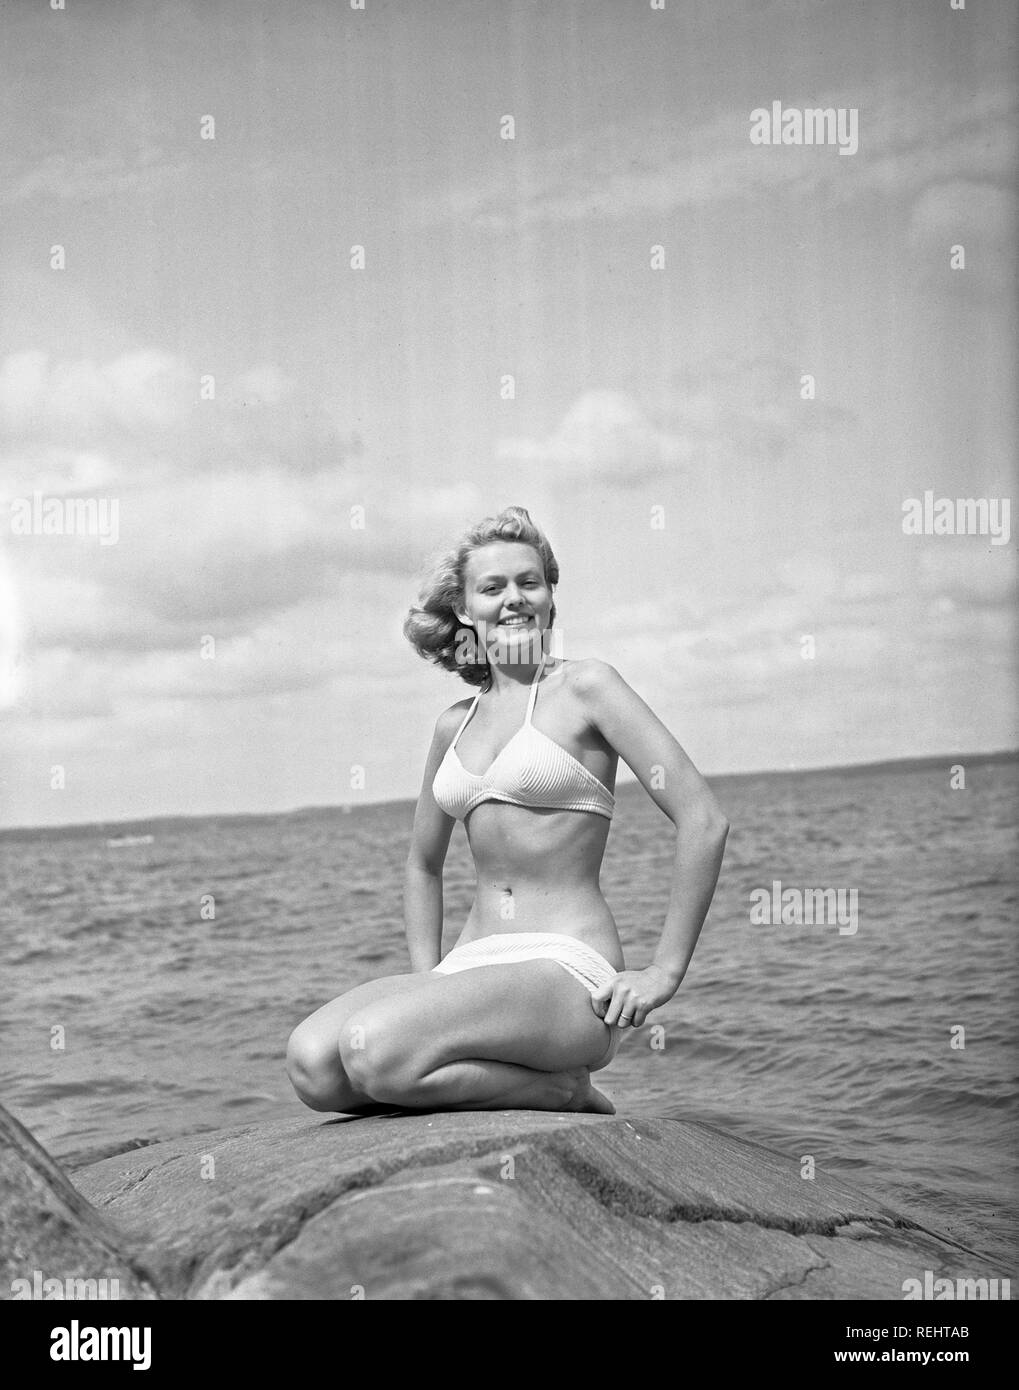 1940s bikinifashion. A swedish young woman in a white bikini on a summer's day. Sweden 1948. Photo Kristoffersson ref 217a-7. Her name is Haide Göransson, swedish fashion model. Stock Photo